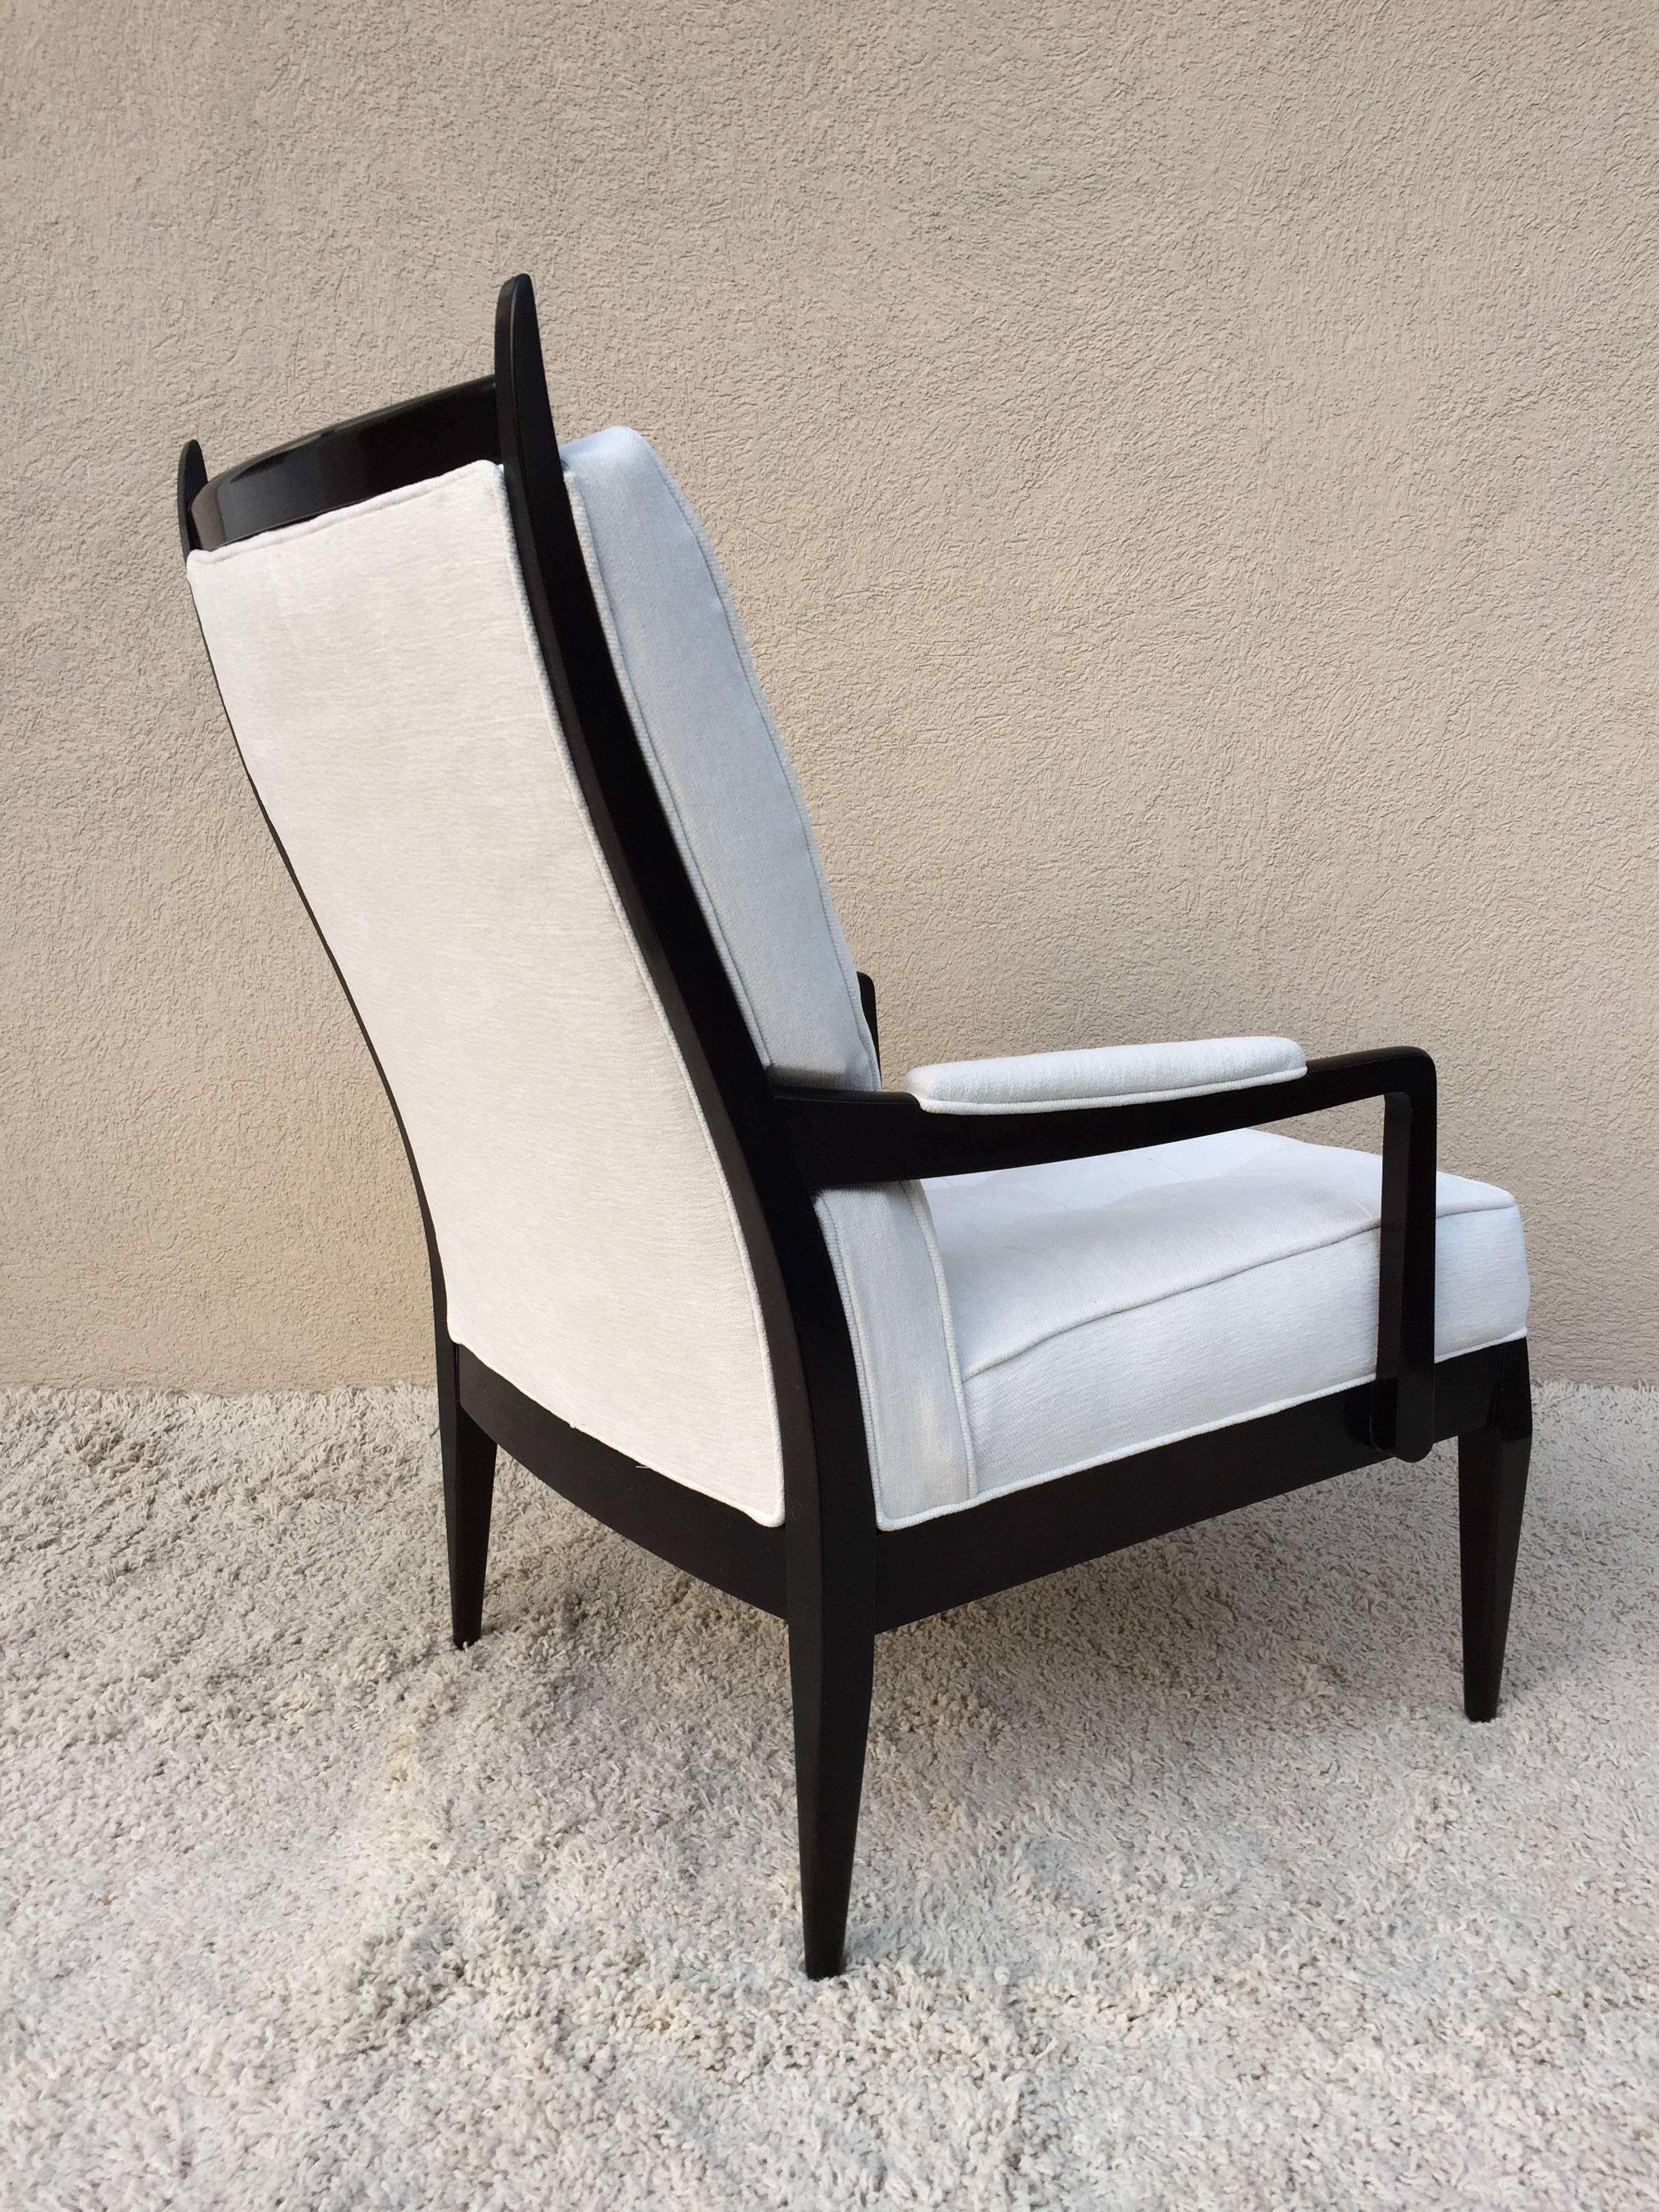 Pair of High Back Elegant Club Chairs In Excellent Condition For Sale In Westport, CT